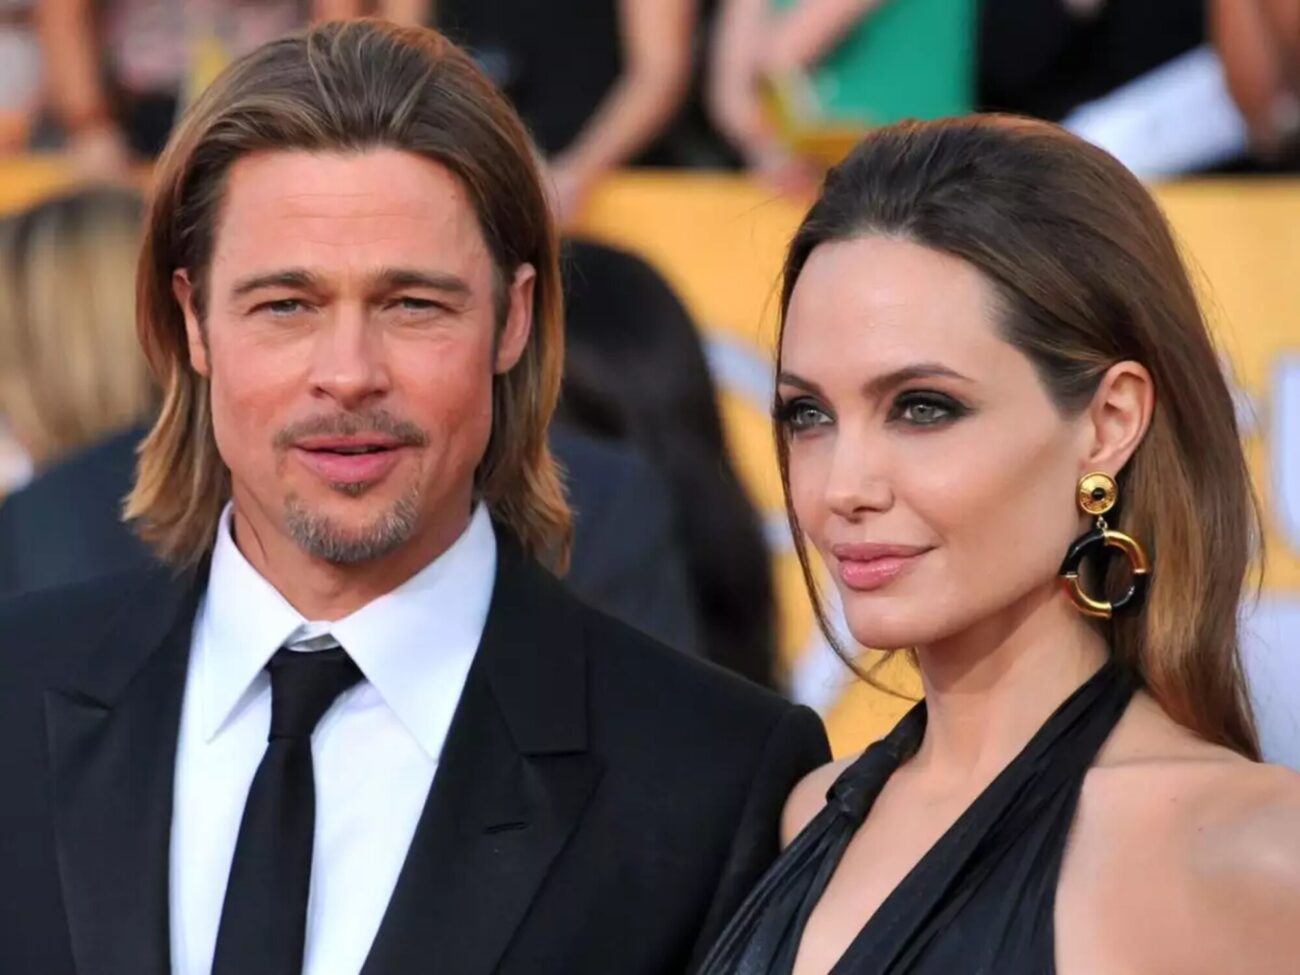 The battle between Brad Pitt and Angelina Jolie over custody of their kids is far from over. Delve into the latest twist in this star-studded battle!